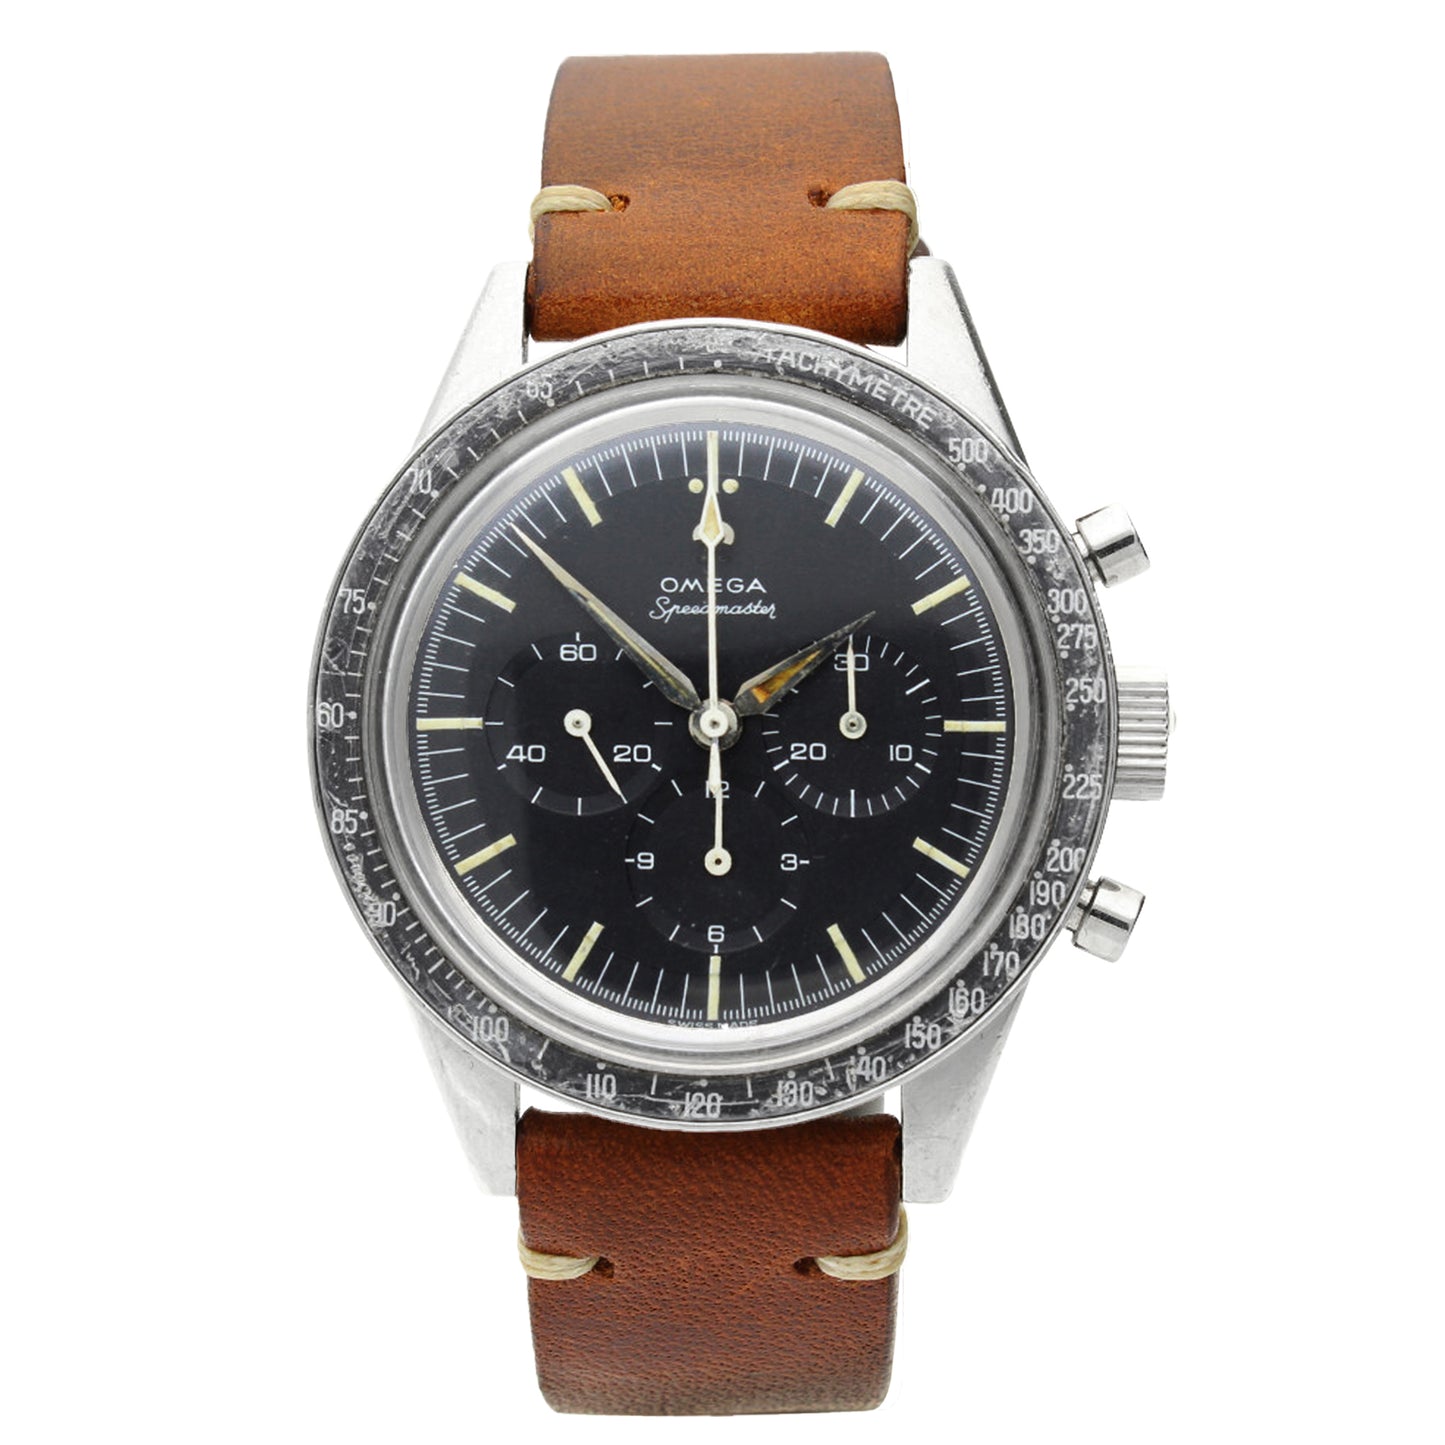 Stainless steel OMEGA Speedmaster, reference 2998-62 chronograph wristwatch. Made 1962